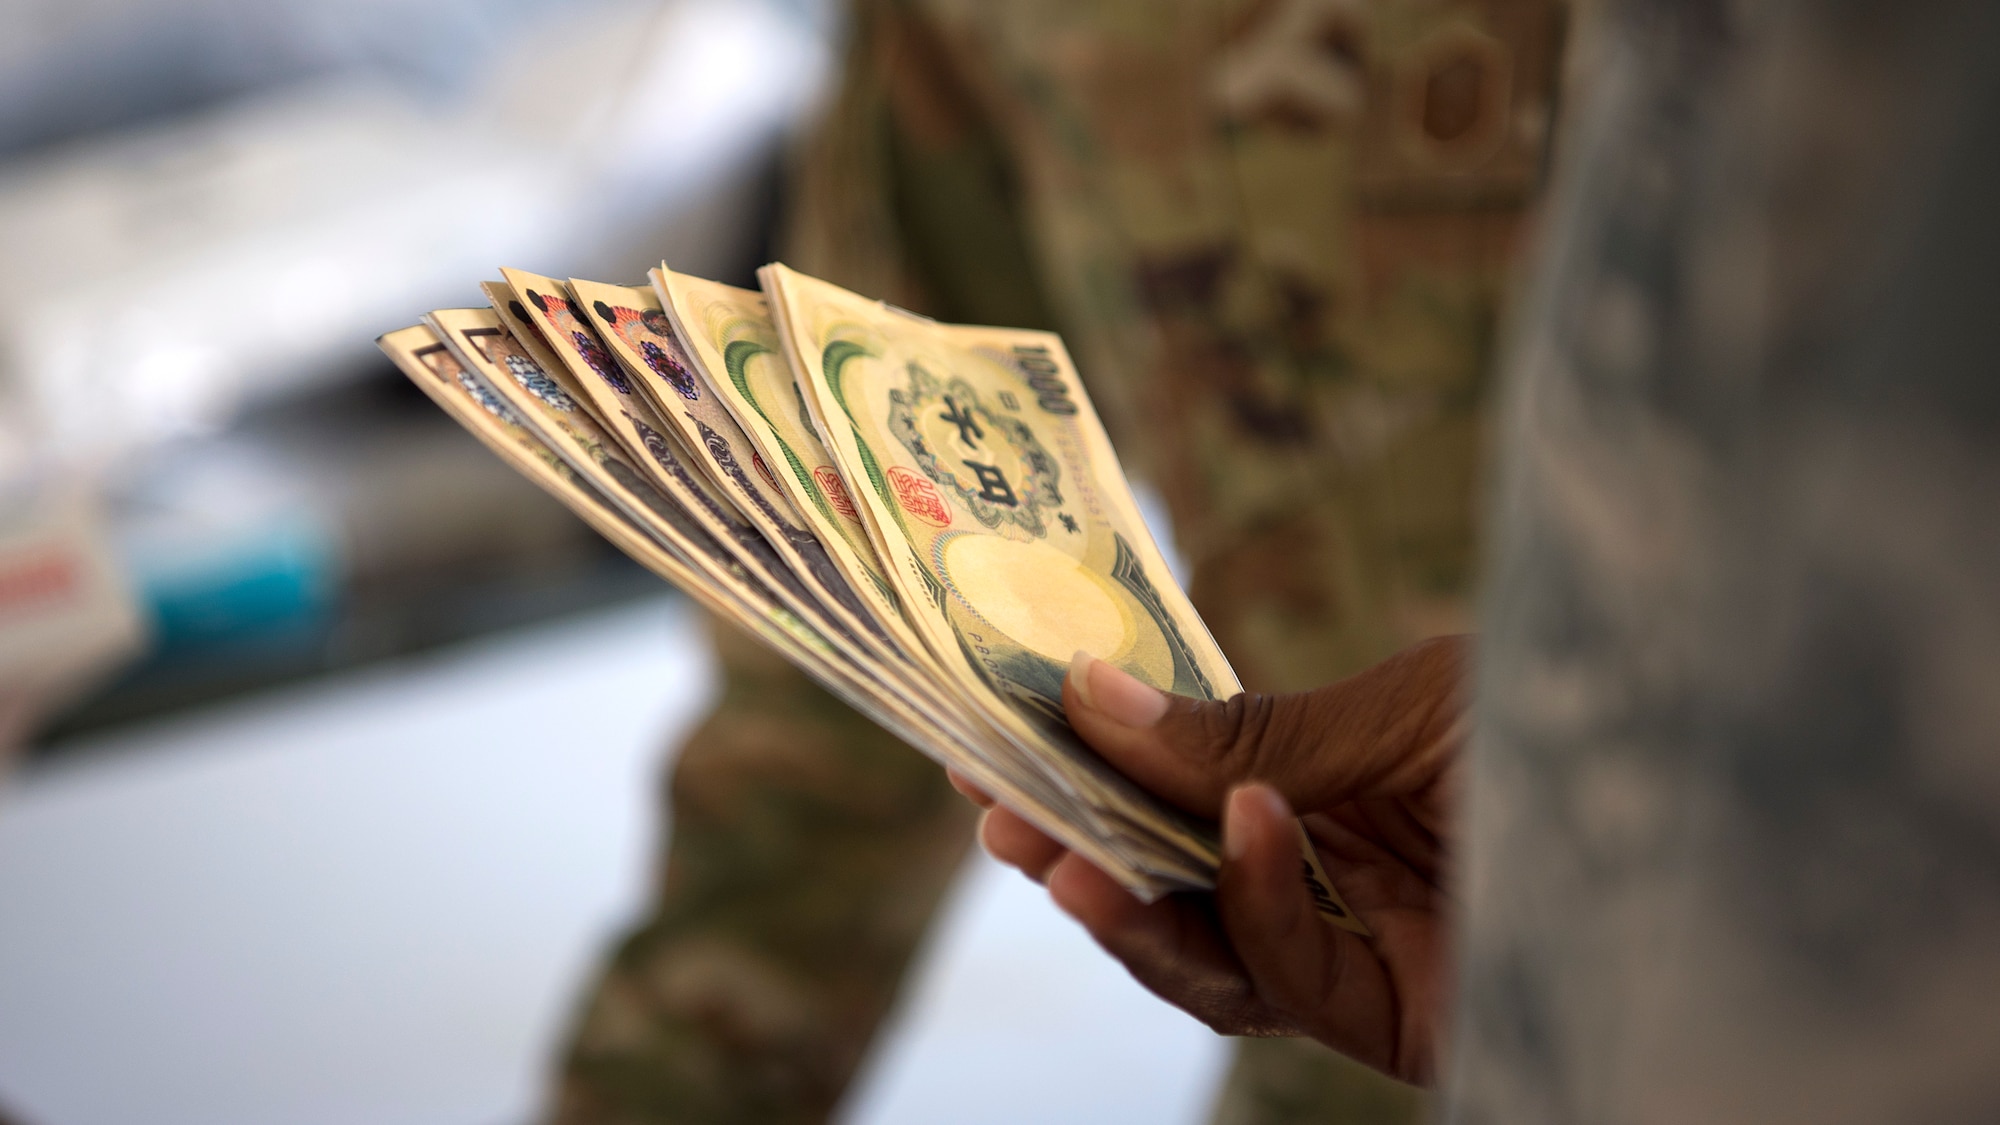 Airmen from the 6th Contracting Squadron at MacDill Air Force Base, Fla., exchange currency during the Operation Open Horizon training exercise April 16, 2019. The 6th CONS partnered with the 6th Comptroller Squadron in a simulated deployment to a forward operating base being stood up to deter a fictional aggressor.